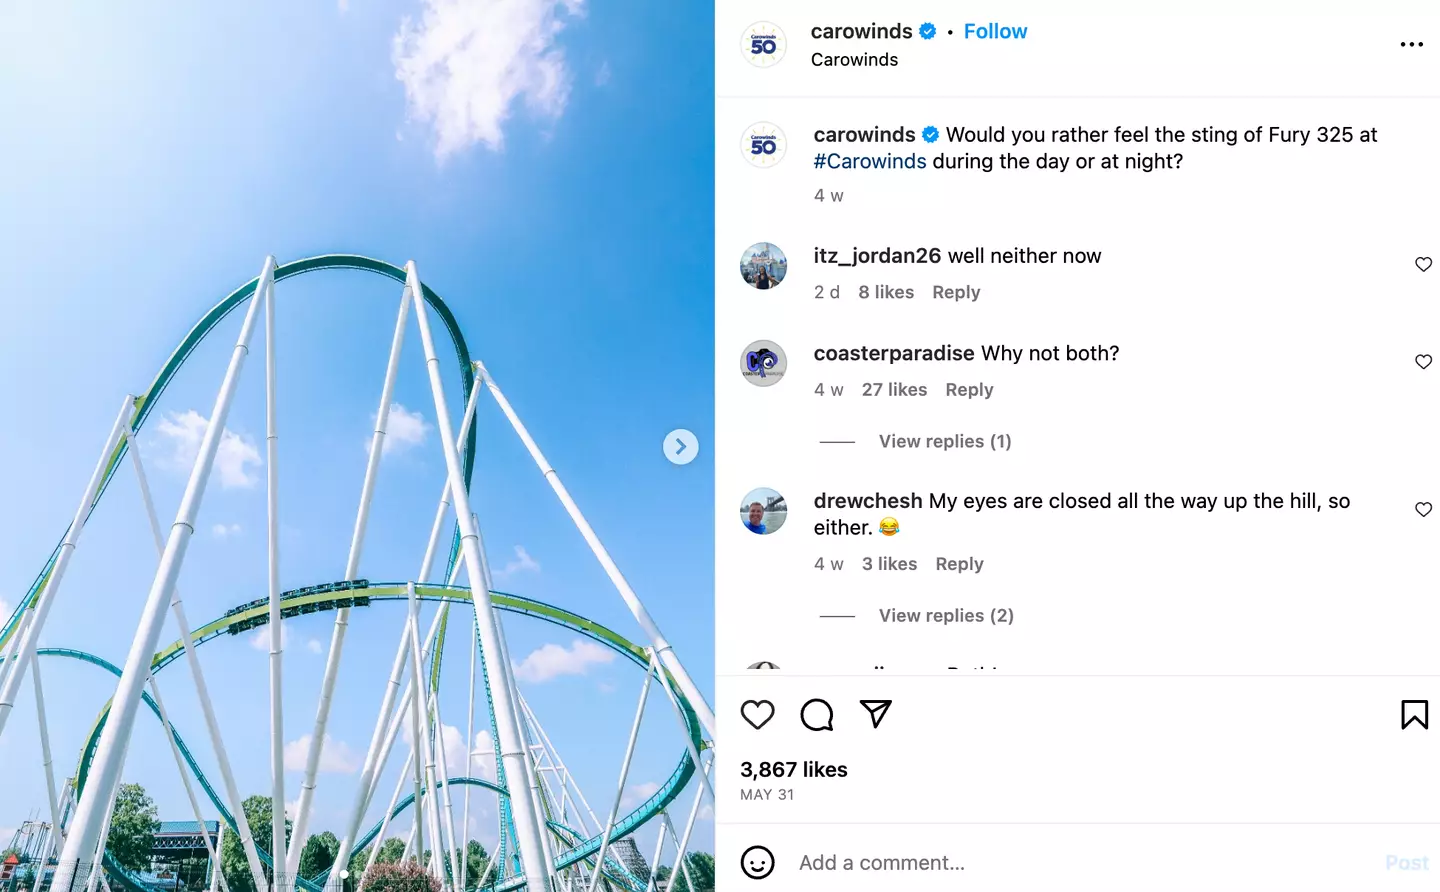 Fury 325 is one of Carowinds' biggest attractions.